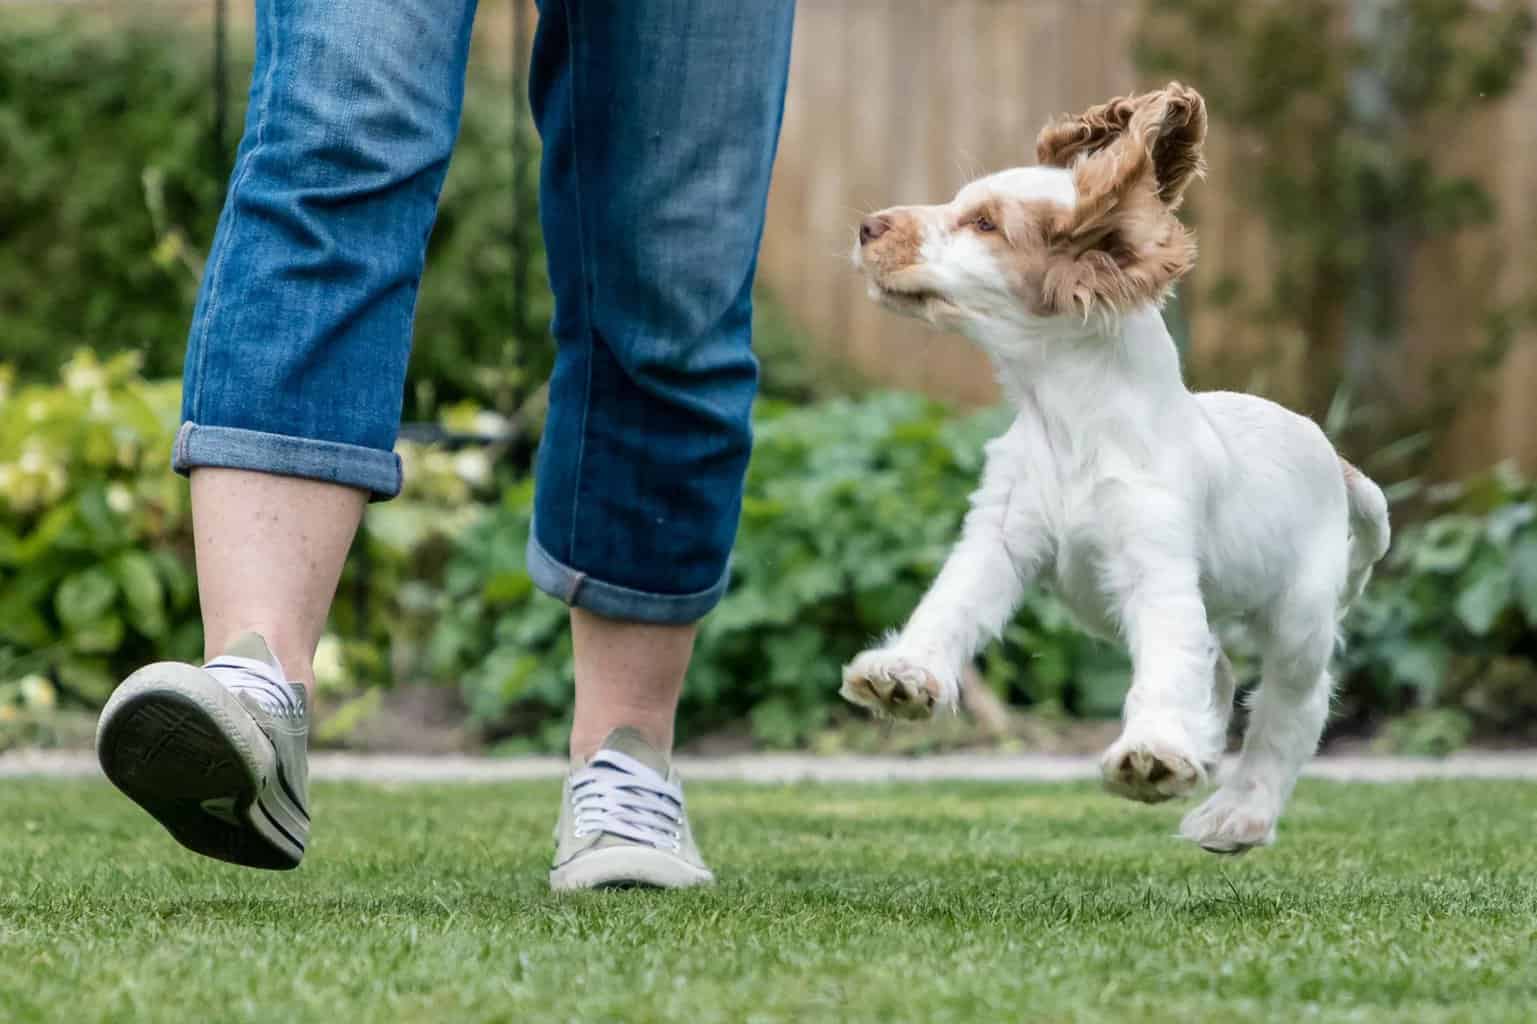 Owner walks with happy, bouncy springer spaniel puppy. Common dog owner mistakes include skipping exercise, training, and socialization, choosing the wrong toys, and choosing punishment over praise.